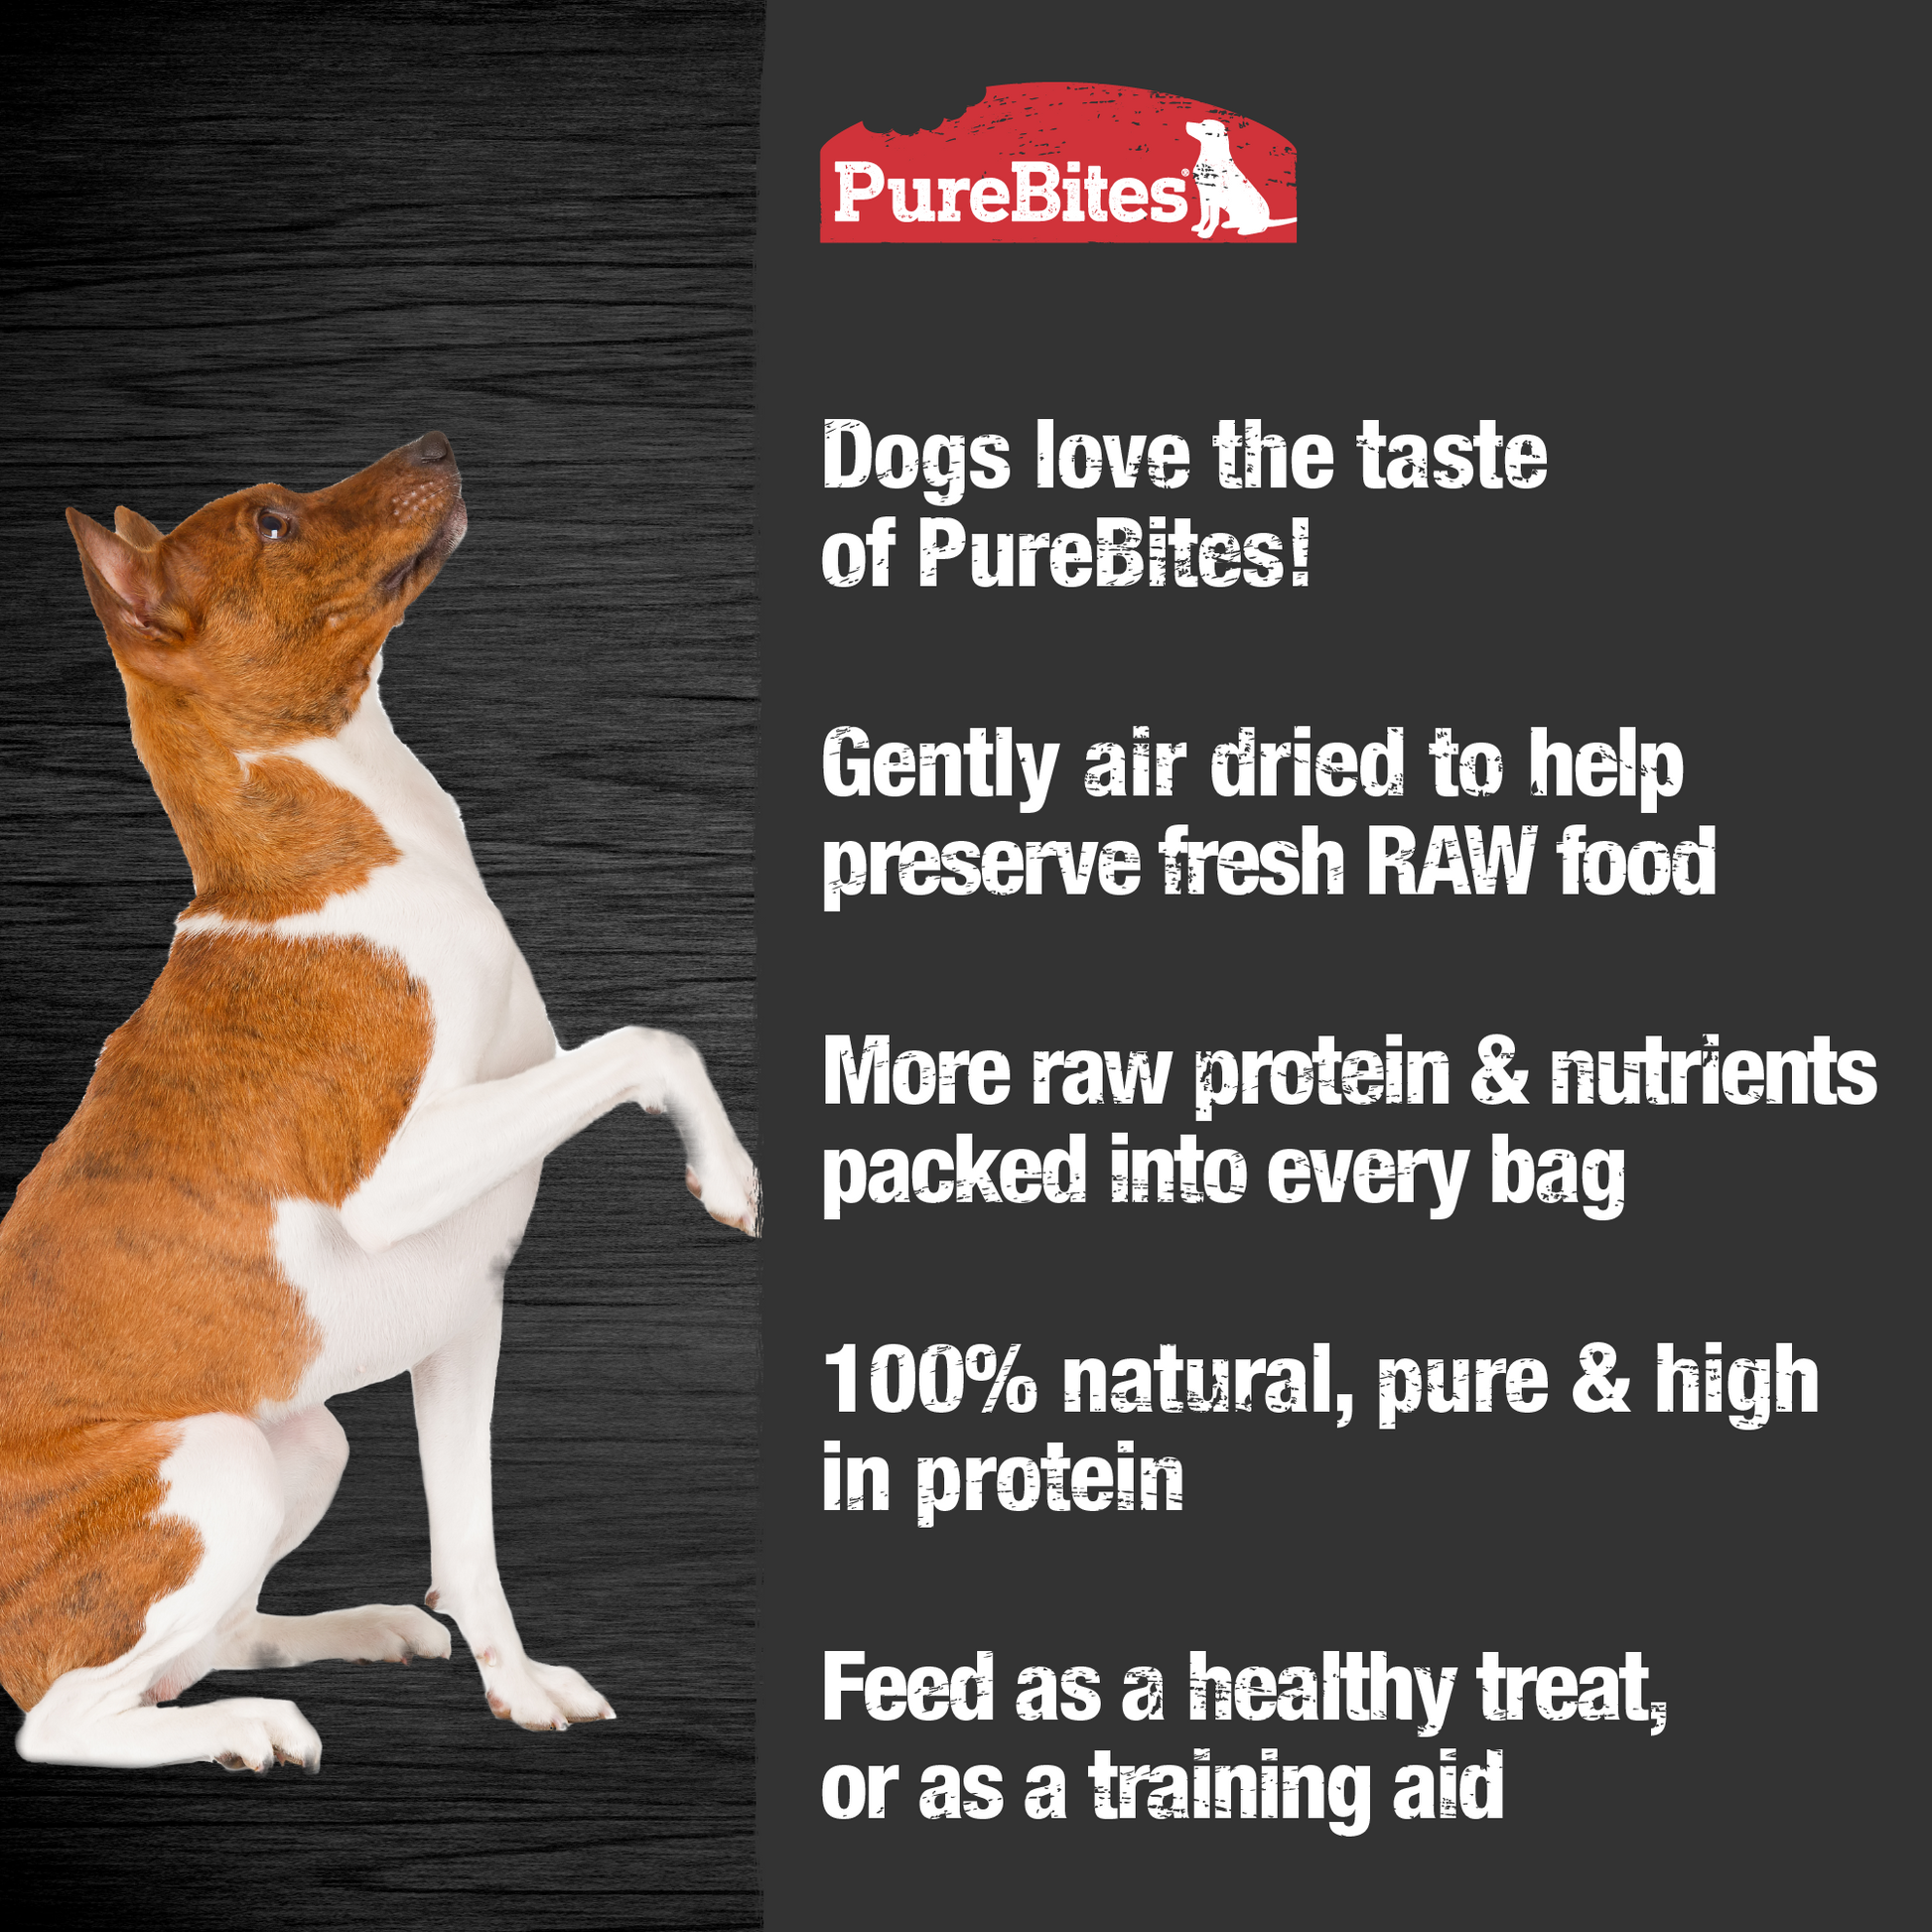 Made fresh & pure means more RAW protein and nutrients packed into every bag. Our chicken jerky is delicately air dried to help preserve its RAW taste, and nutrition, and mirror a dog’s ancestral diet.